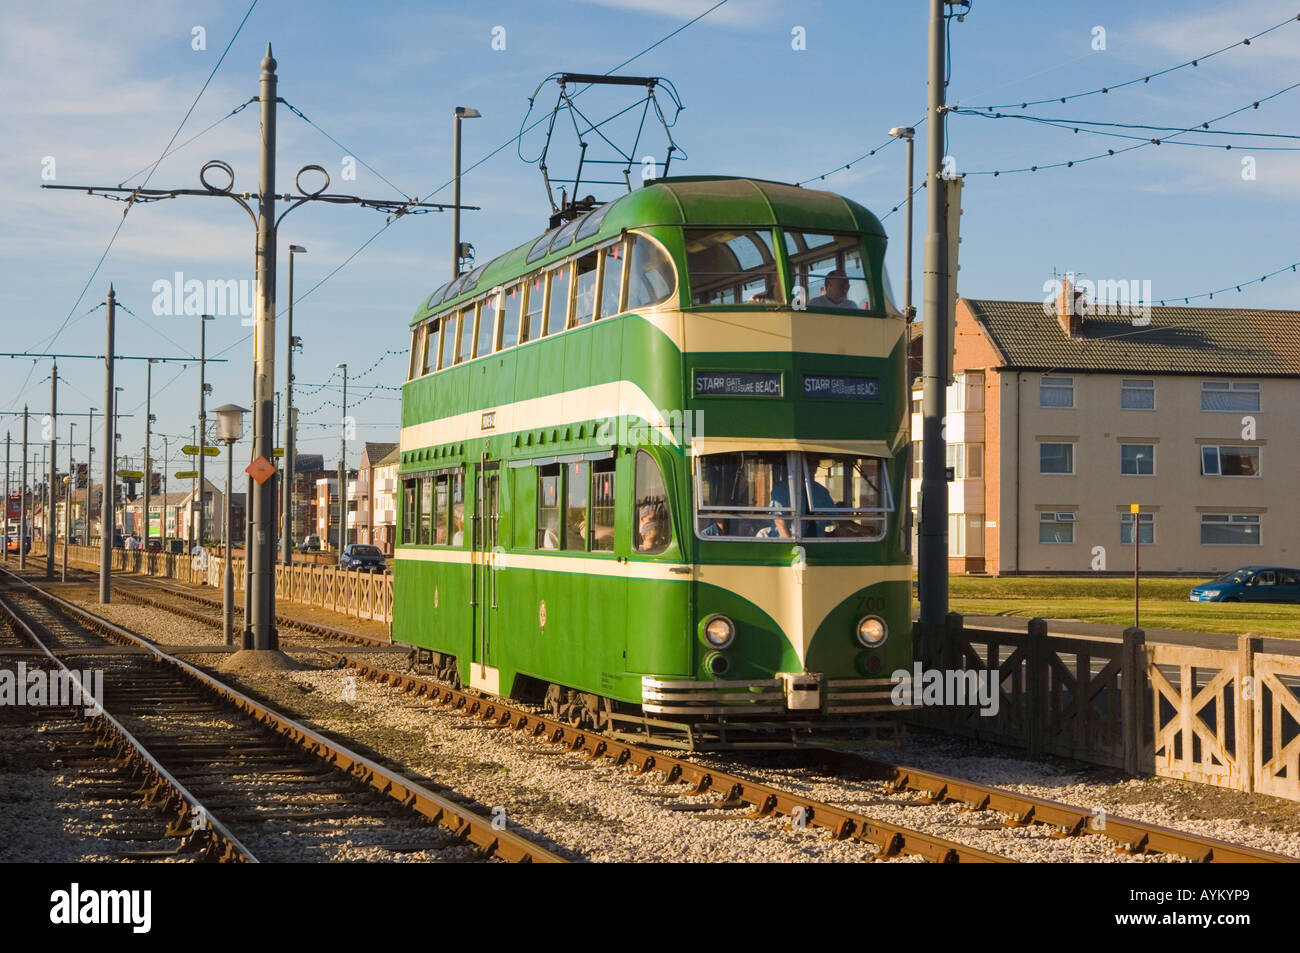 Double decker balloon tram dating from the 1930s at Blackpool Stock Photo